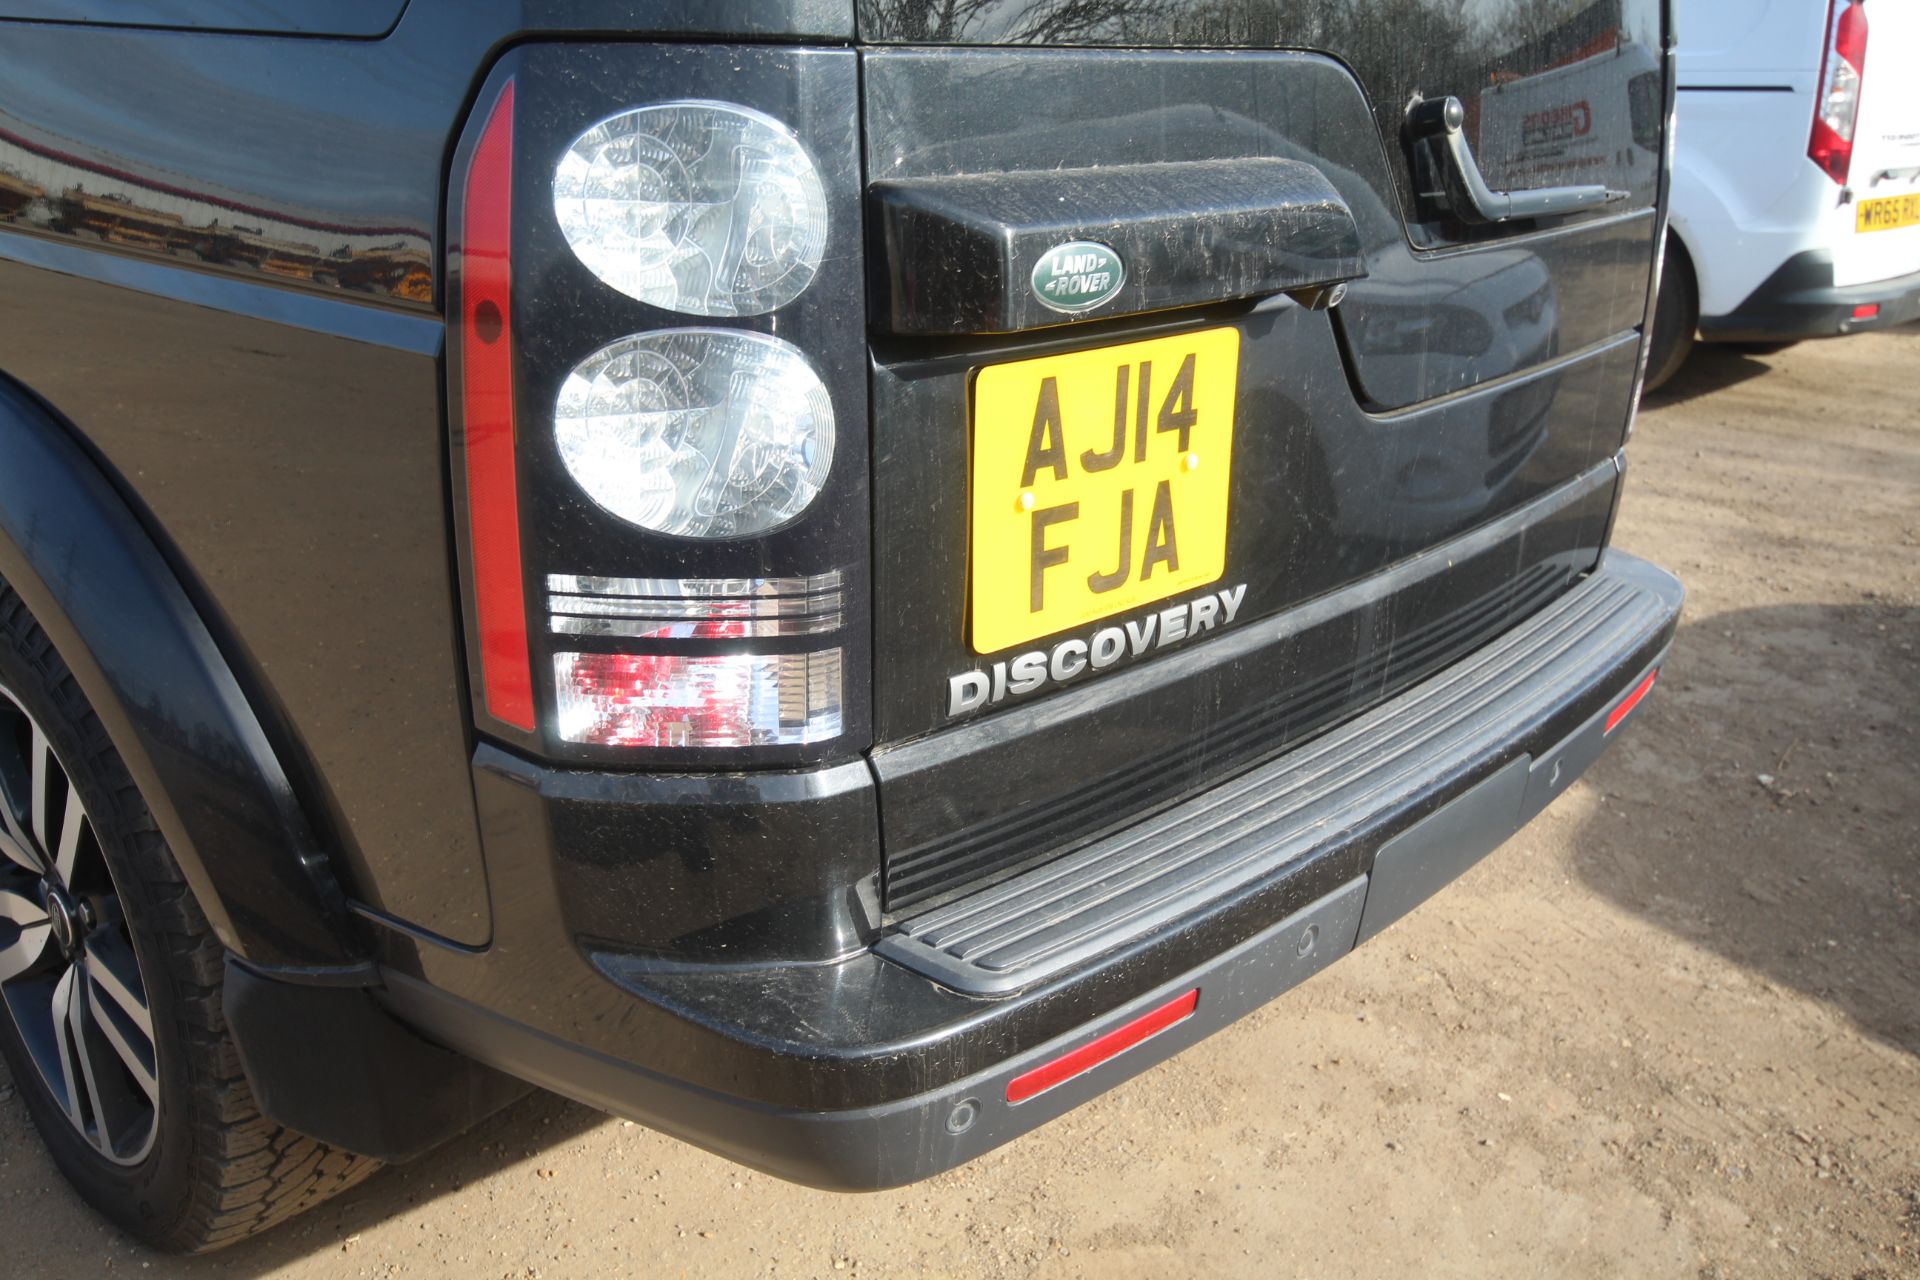 Land Rover Discovery 4 3.0L diesel Commercial. Registration AJ14 FJA. Date of first registration - Image 20 of 65